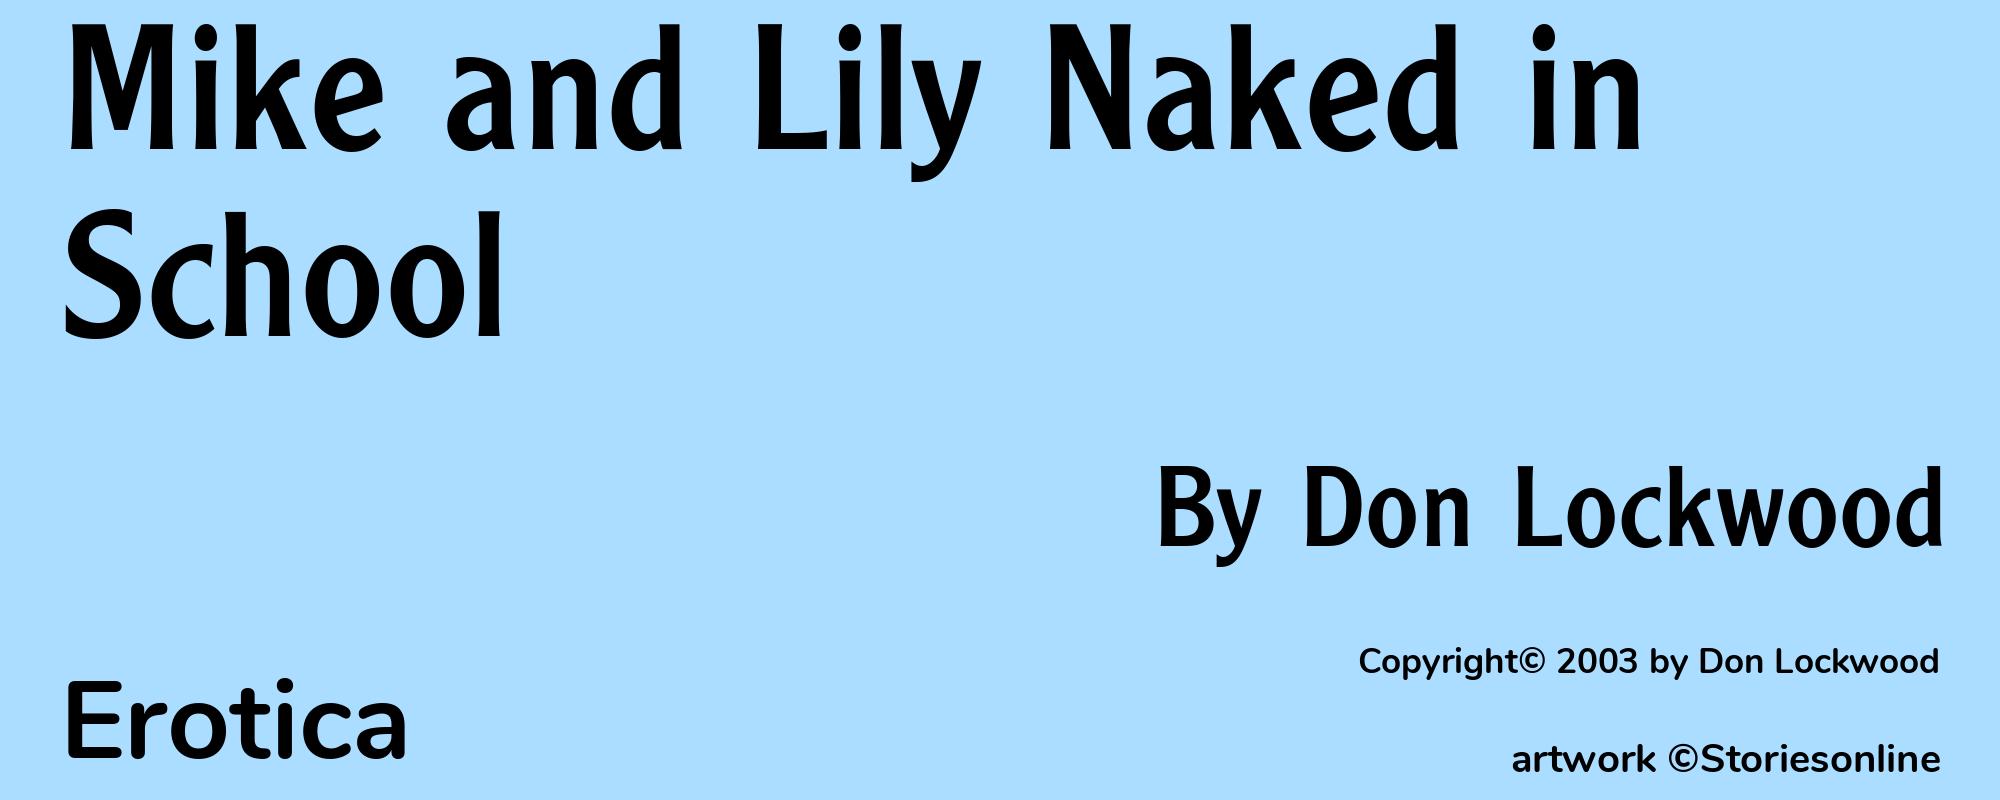 Mike and Lily Naked in School - Cover